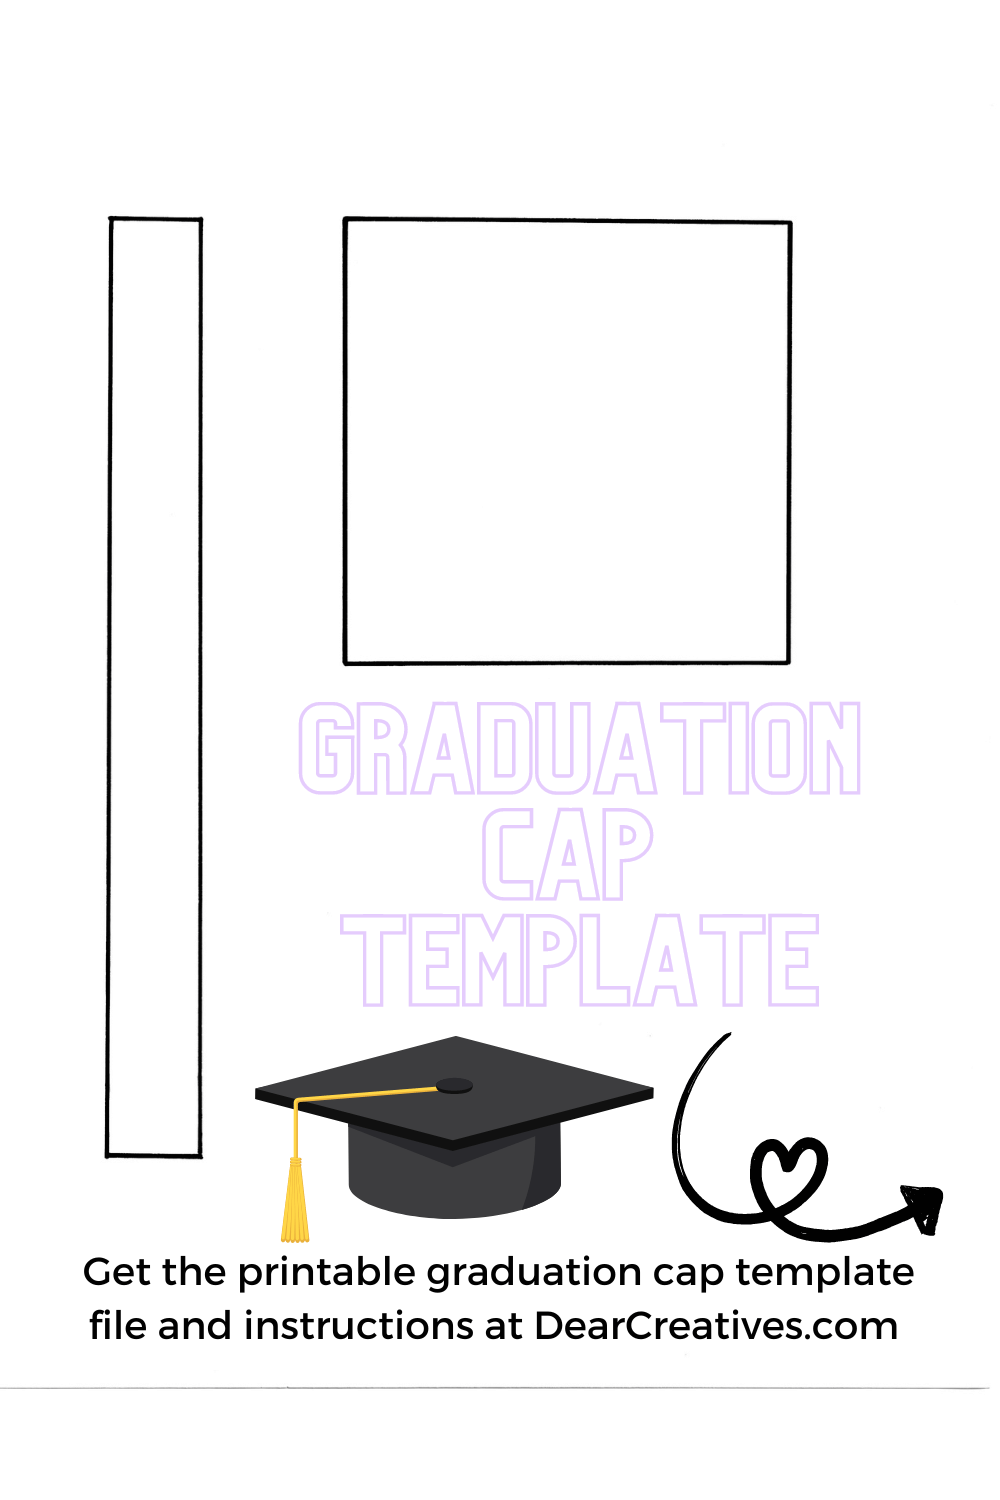 Get the printable graduation cap template file and instructions at DearCreatives.com 